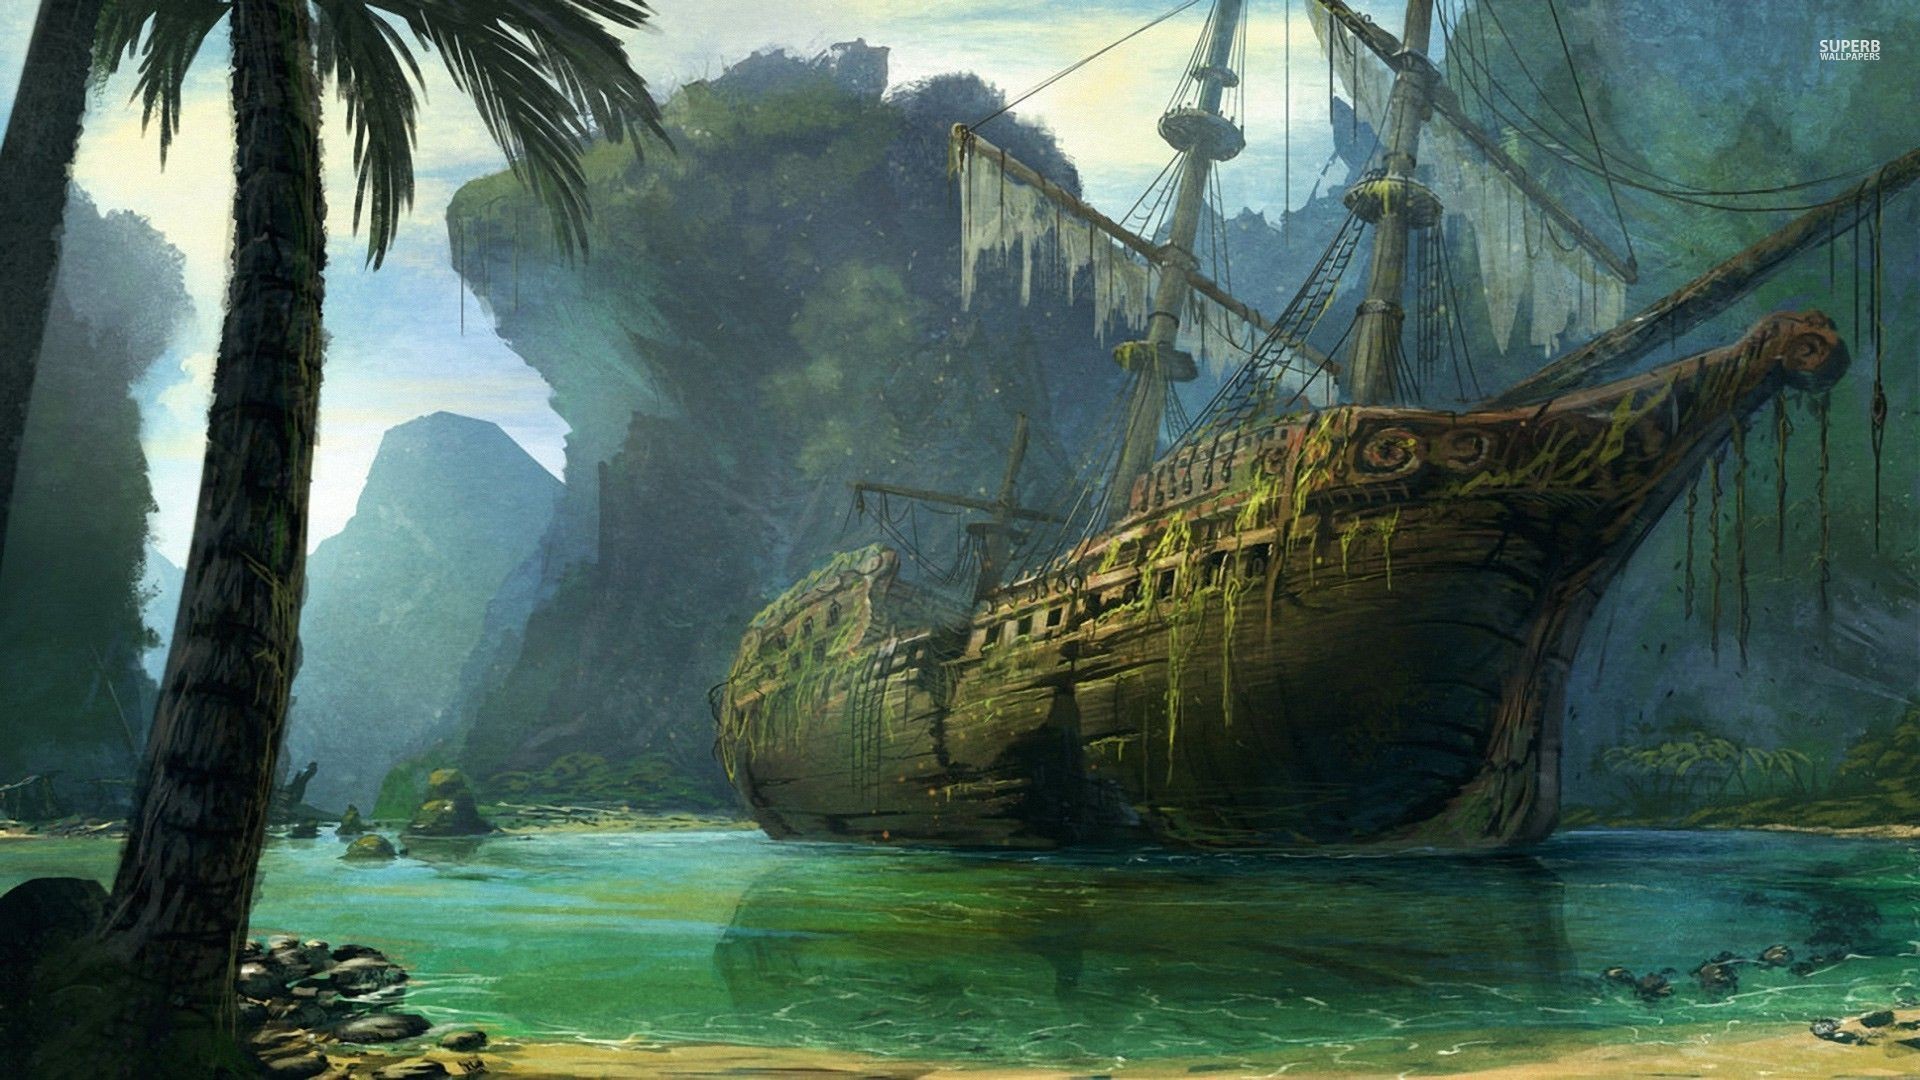 1920x1080, Pirate Ship Wallpapers For Desktop For Hd - Wrecked Pirate Ship - HD Wallpaper 